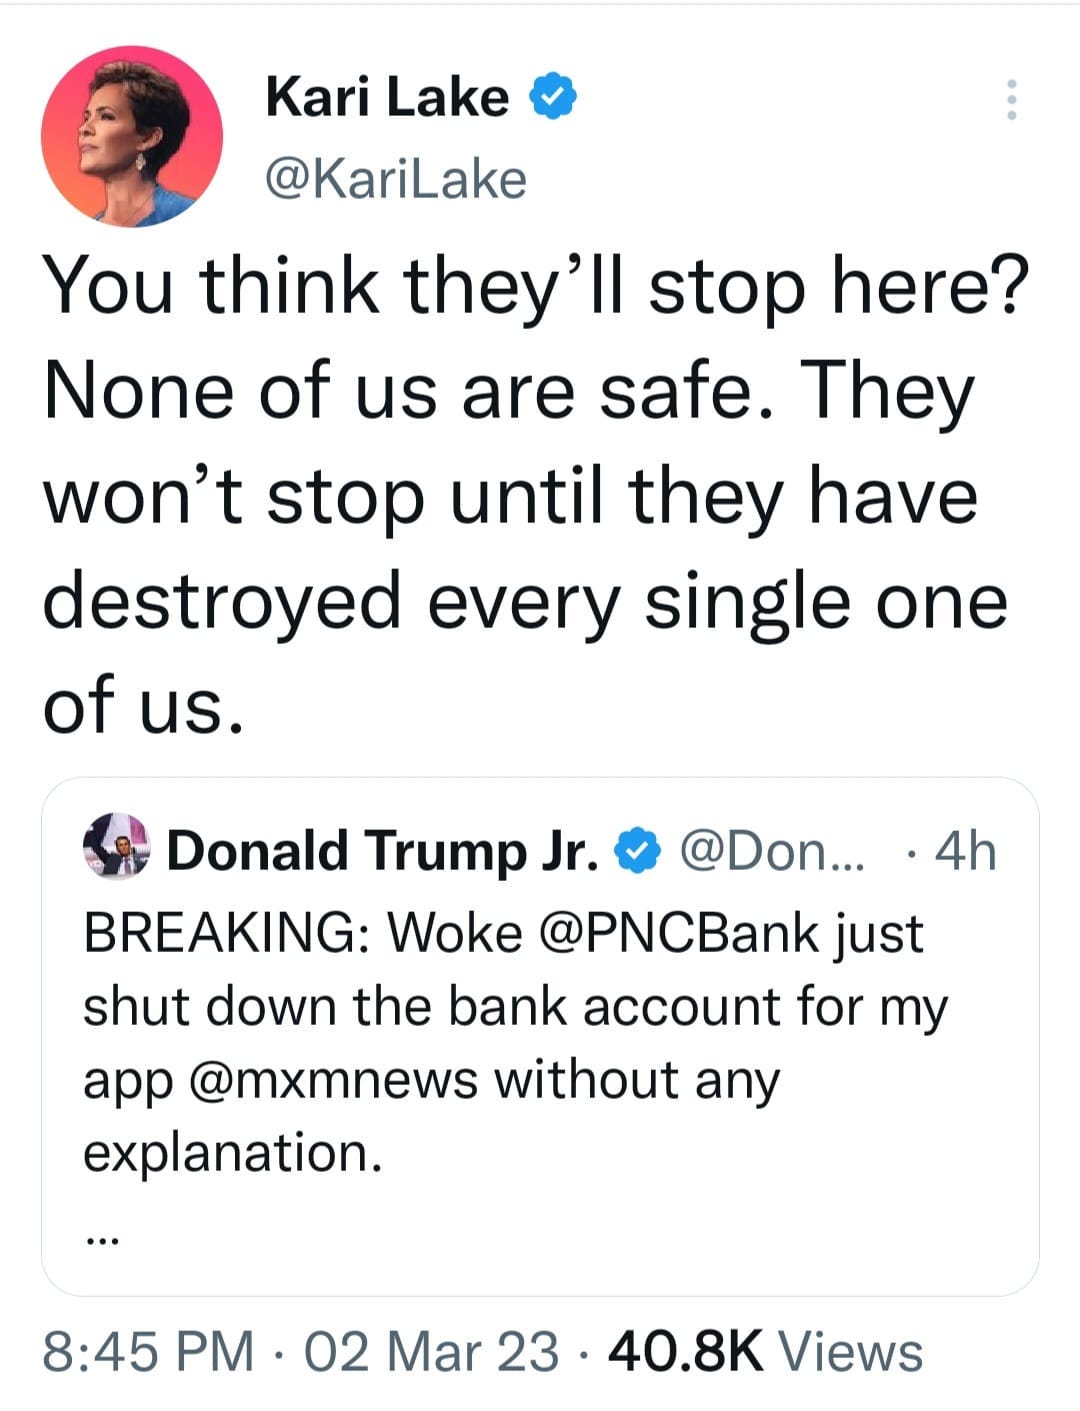 May be a Twitter screenshot of 1 person and text that says 'Kari Lake @KariLake You think they'll stop here? None of us are safe. They won't stop until they have destroyed every single one of us. 4h Donald Trump Jr. @Don... BREAKING: Woke @PNCBank just shut down the bank account for my app @mxmnews without any explanation. 8:45 PM 02 Mar 23. 40.8K Views'